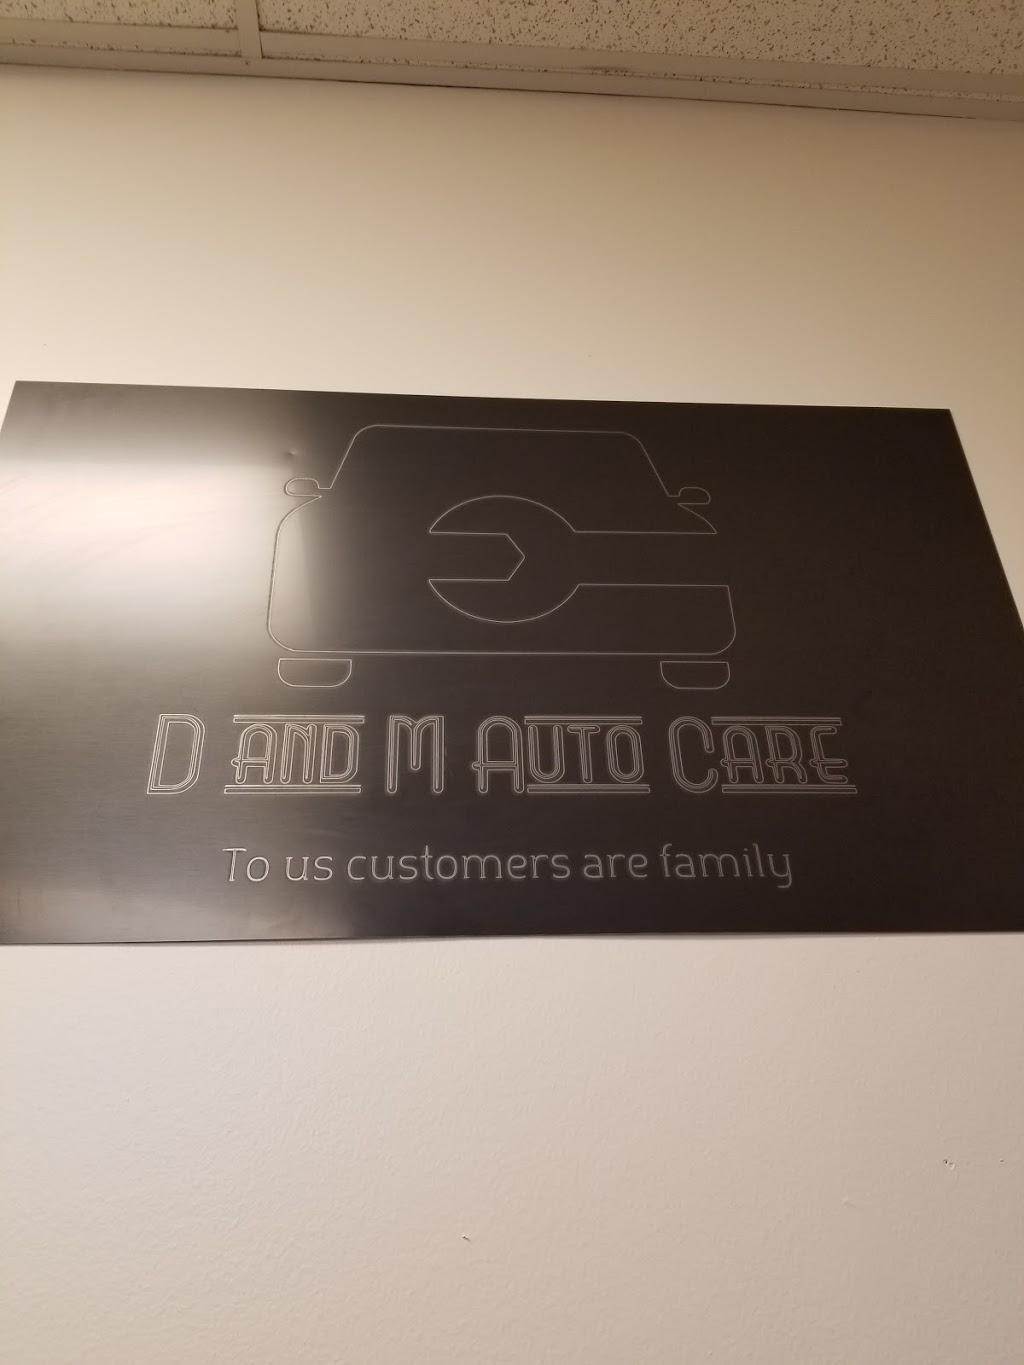 D and M Auto Care | 727 N Britain Rd, Irving, TX 75061, USA | Phone: (972) 251-5000